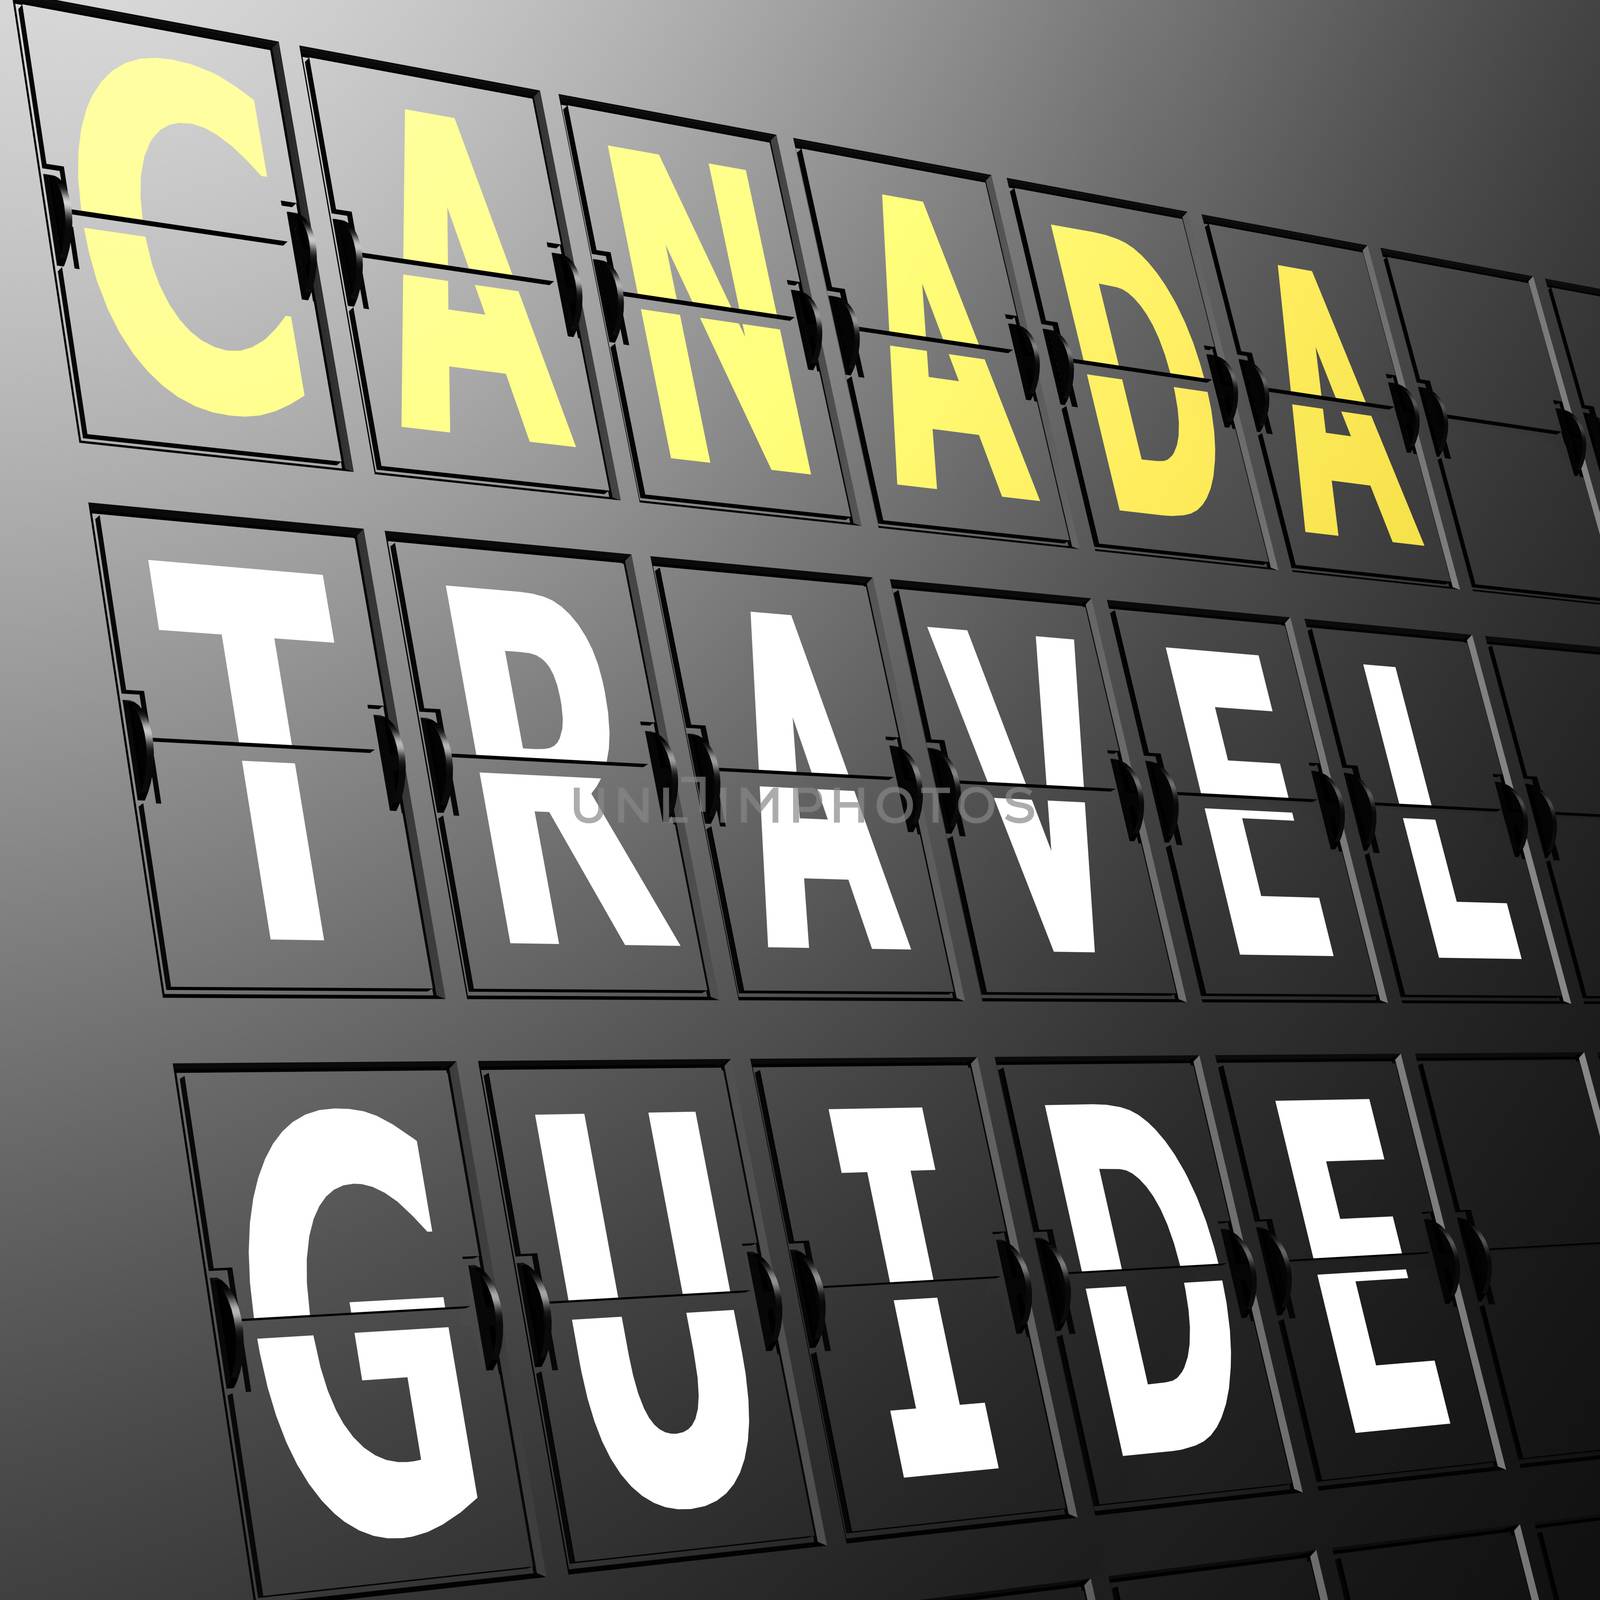 Airport display Canada travel guide by tang90246